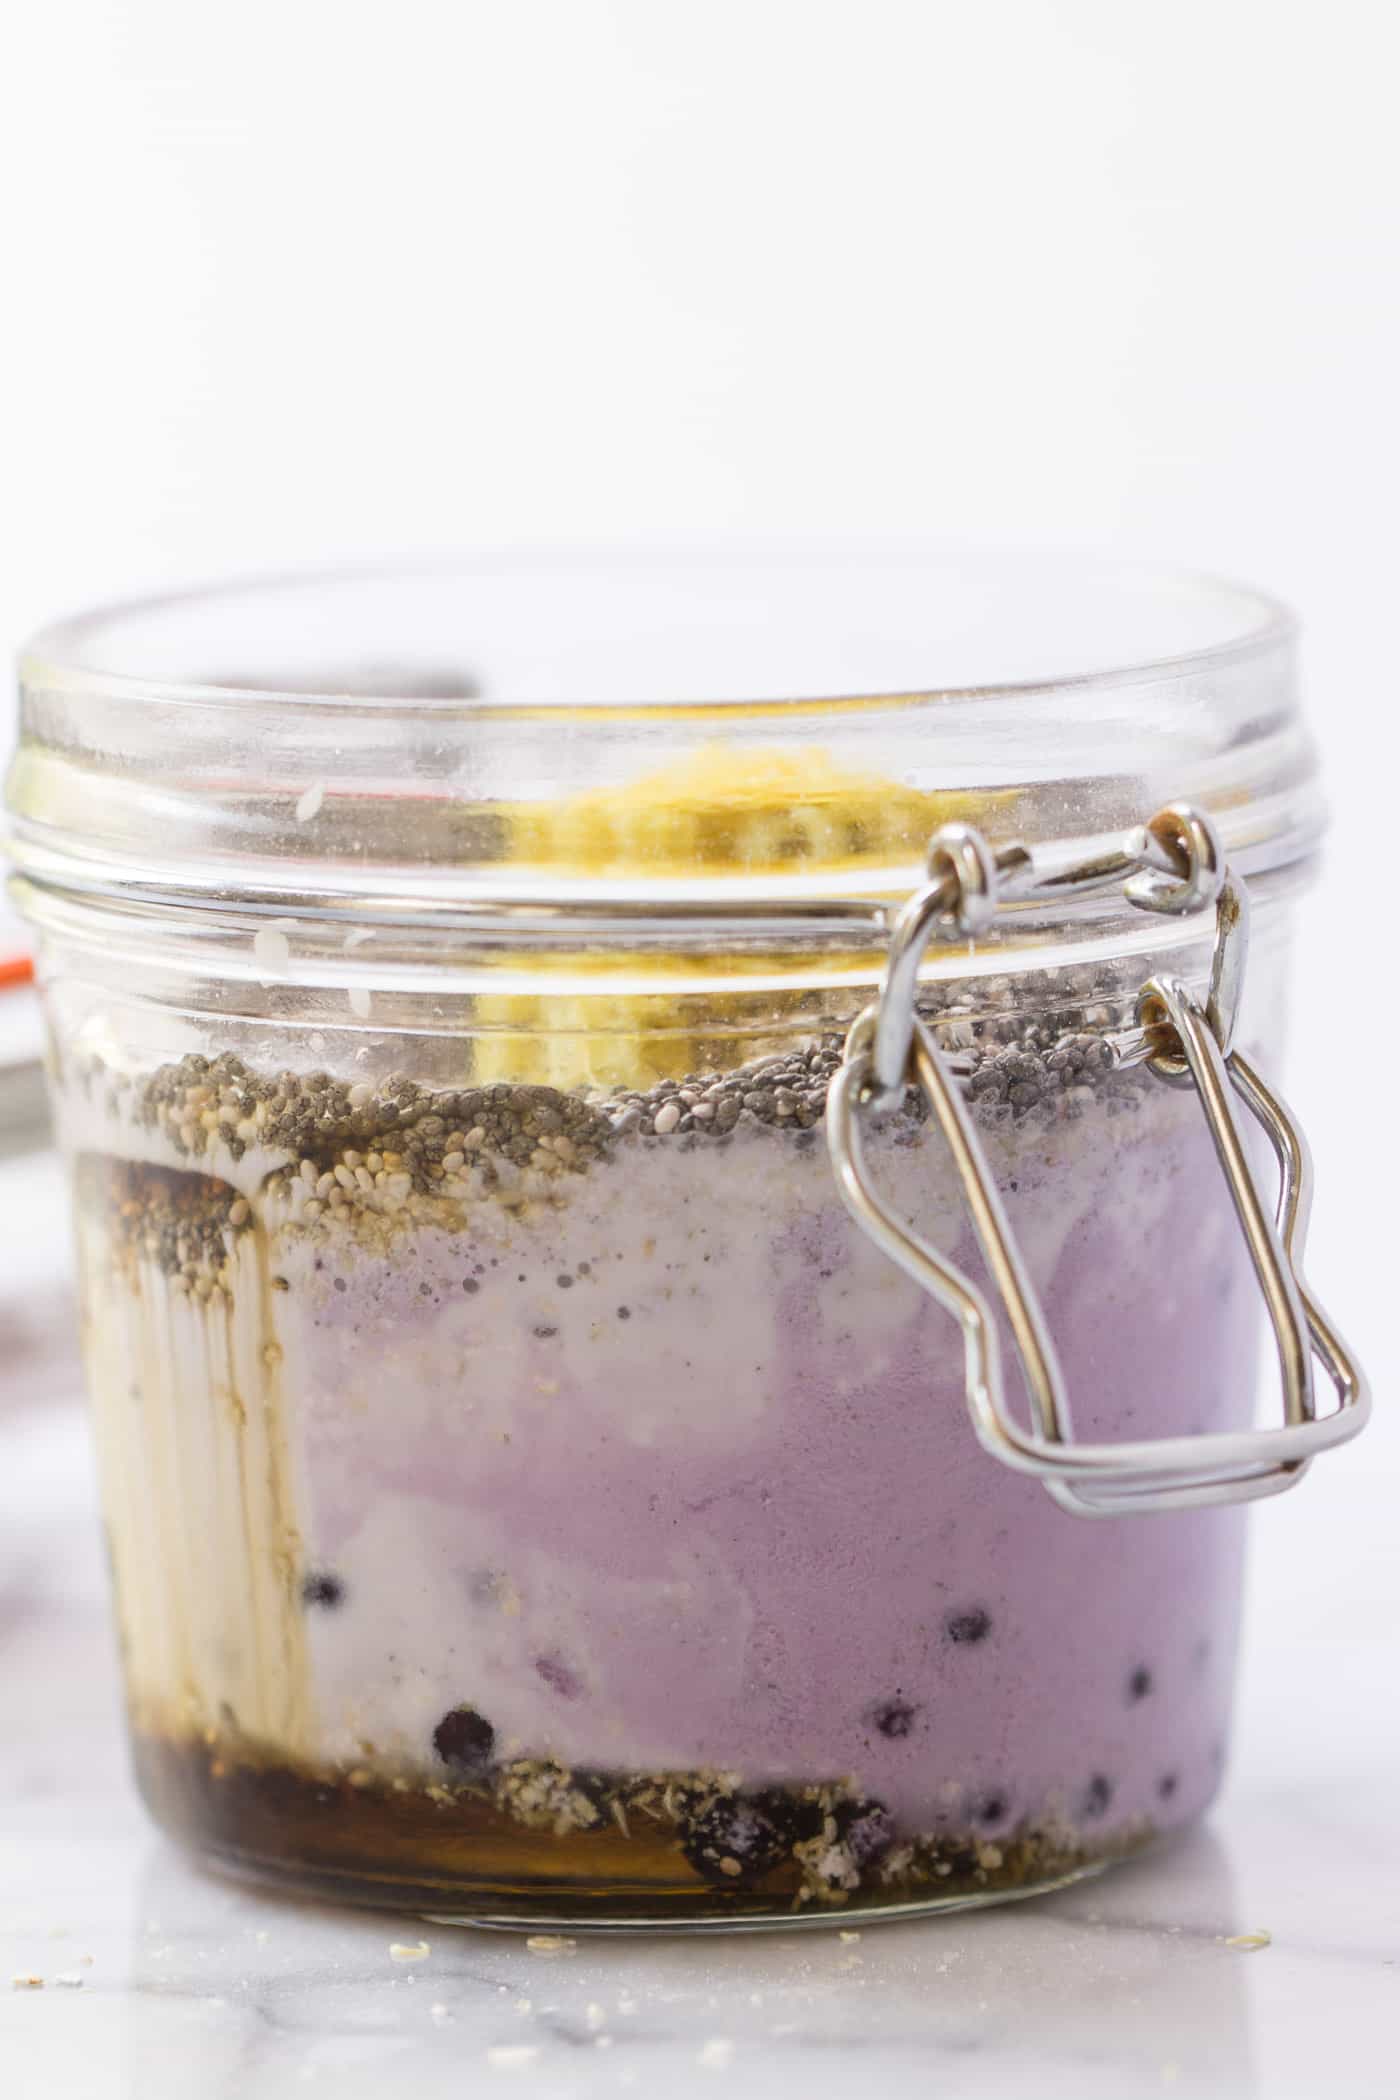 How to make lemon-blueberry overnight quinoa...with only a few simple ingredients! [gluten-free + vegan]